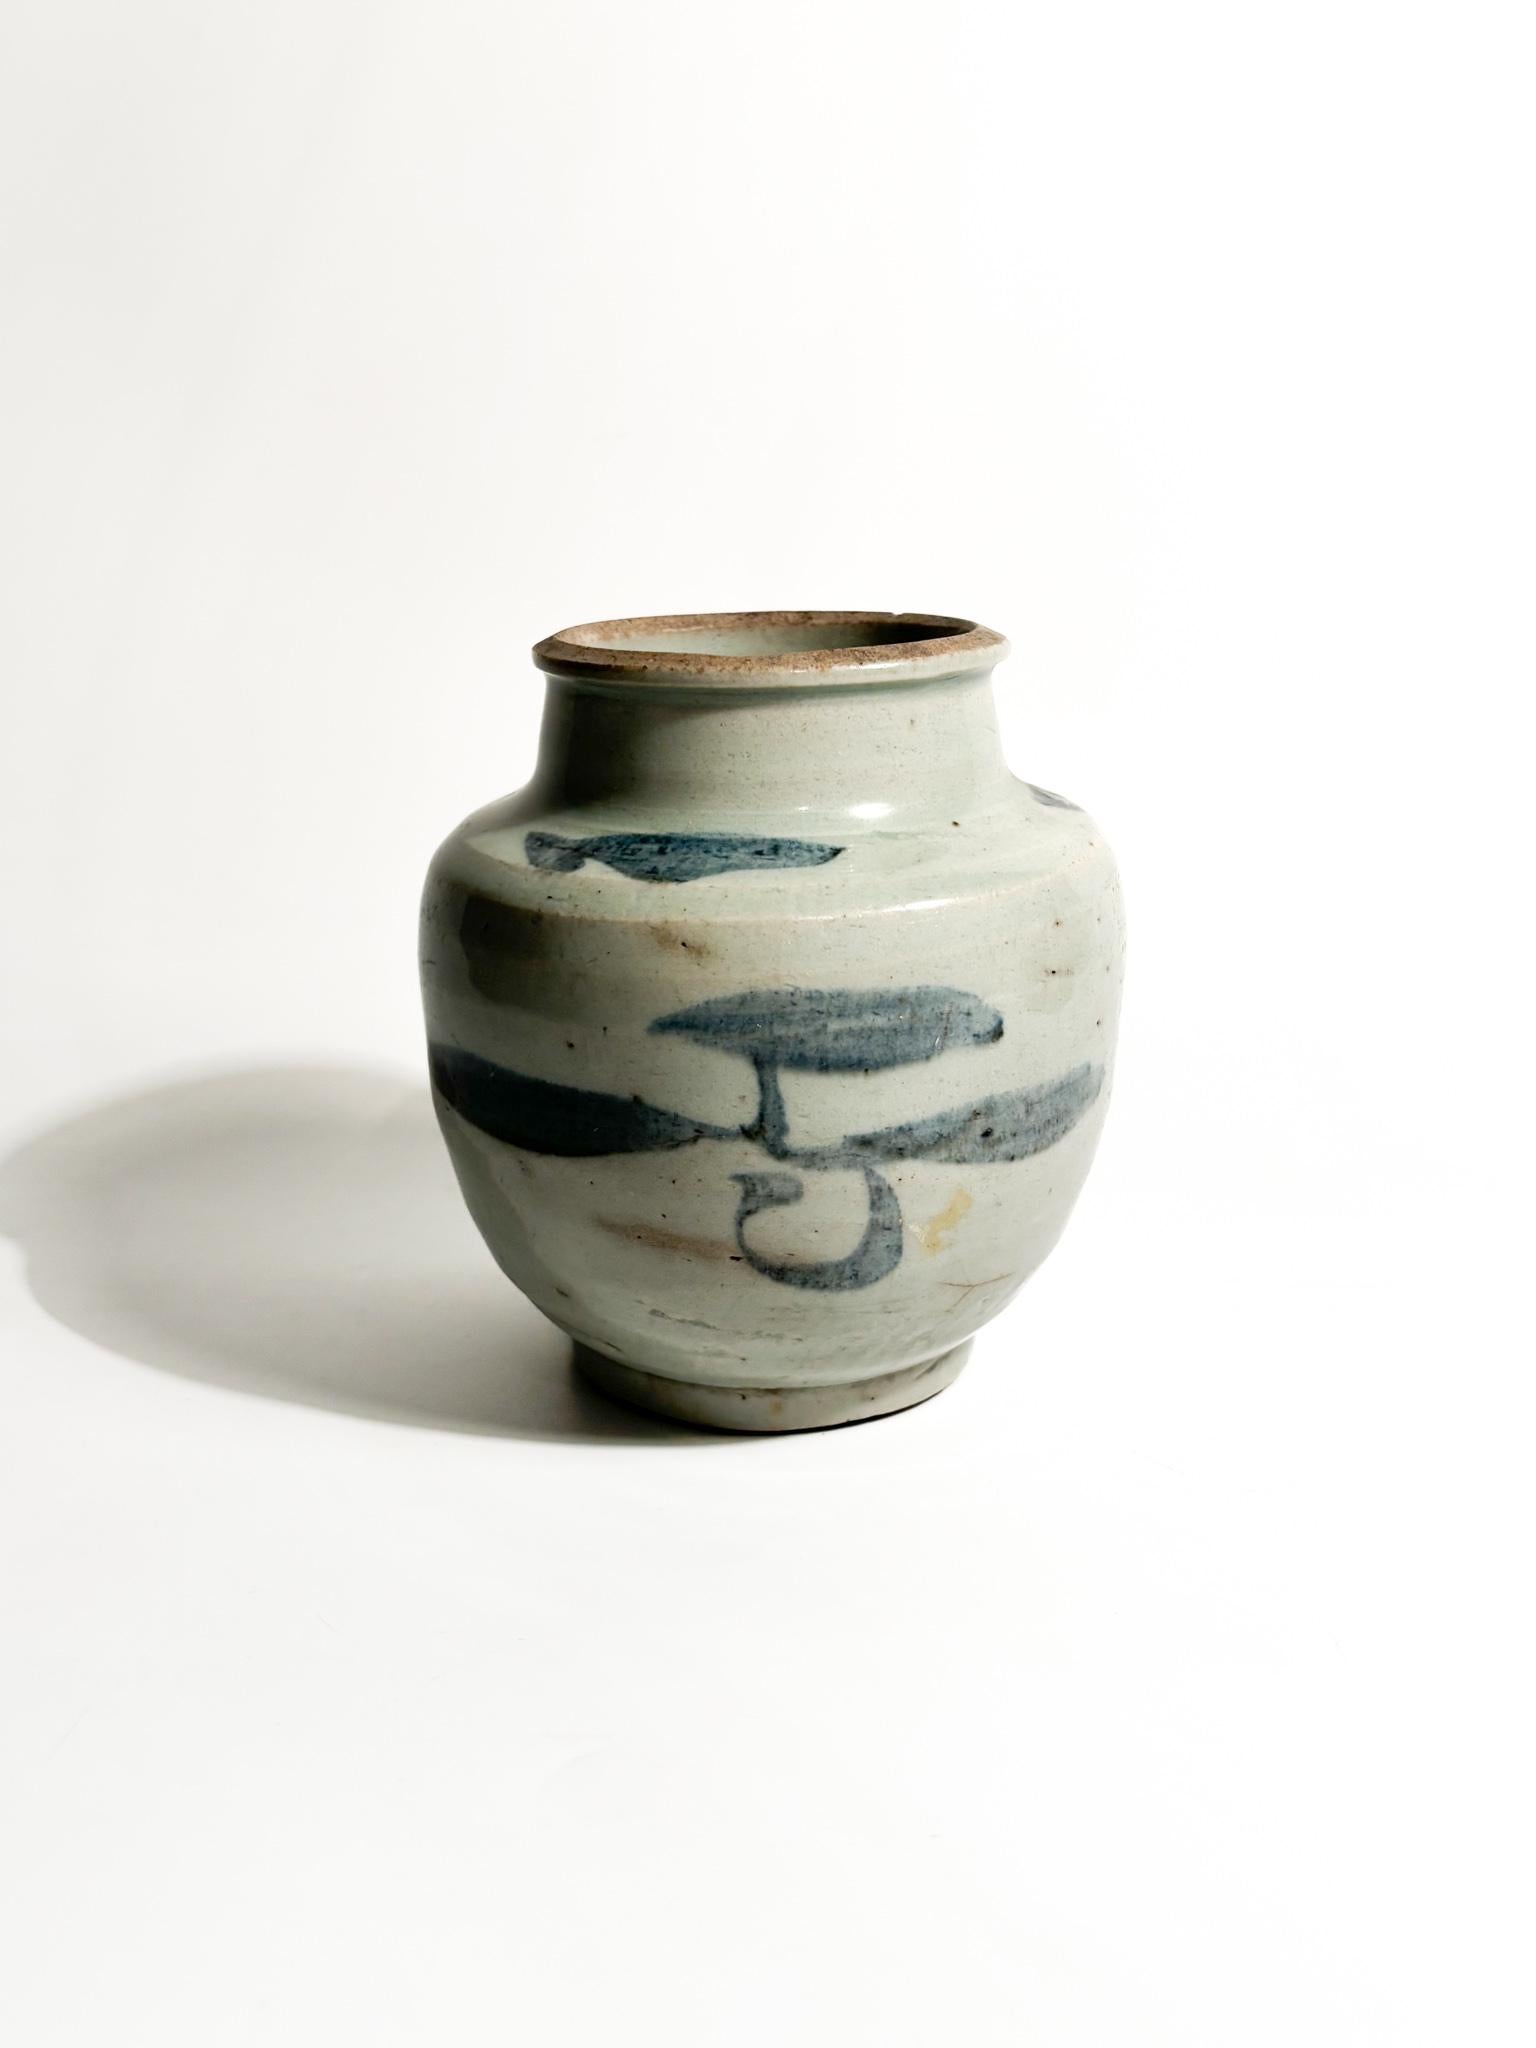 Chinese Ceramic Vase Qing Dynasty Tung Chih Period (1862 - 1875) For Sale 4